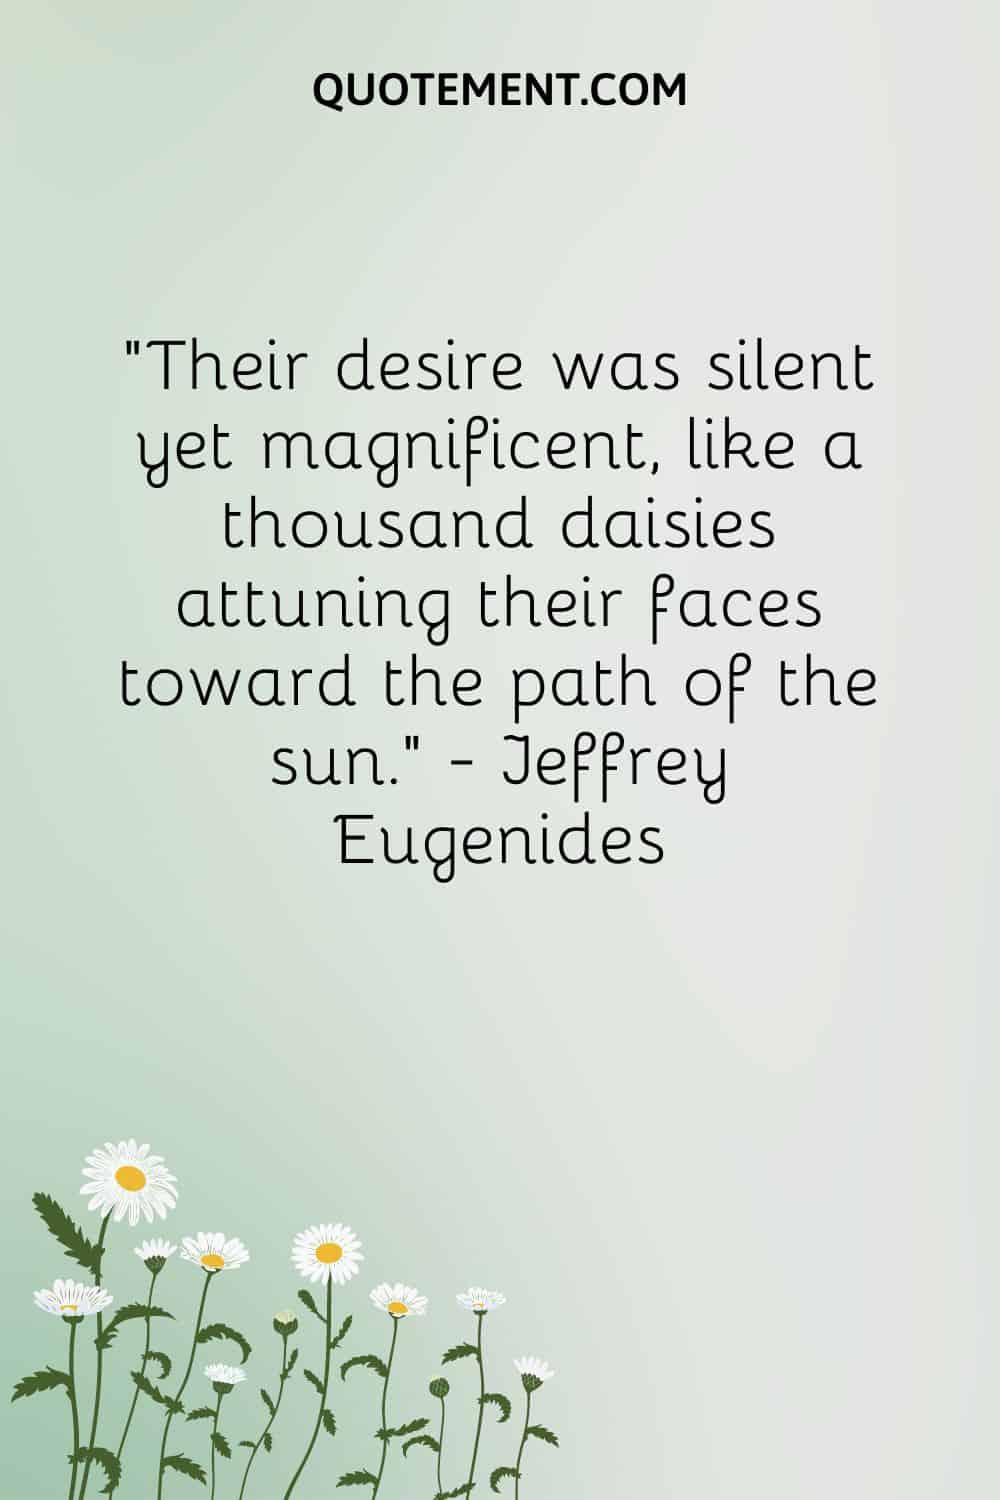 Their desire was silent yet magnificent, like a thousand daisies attuning their faces toward the path of the sun